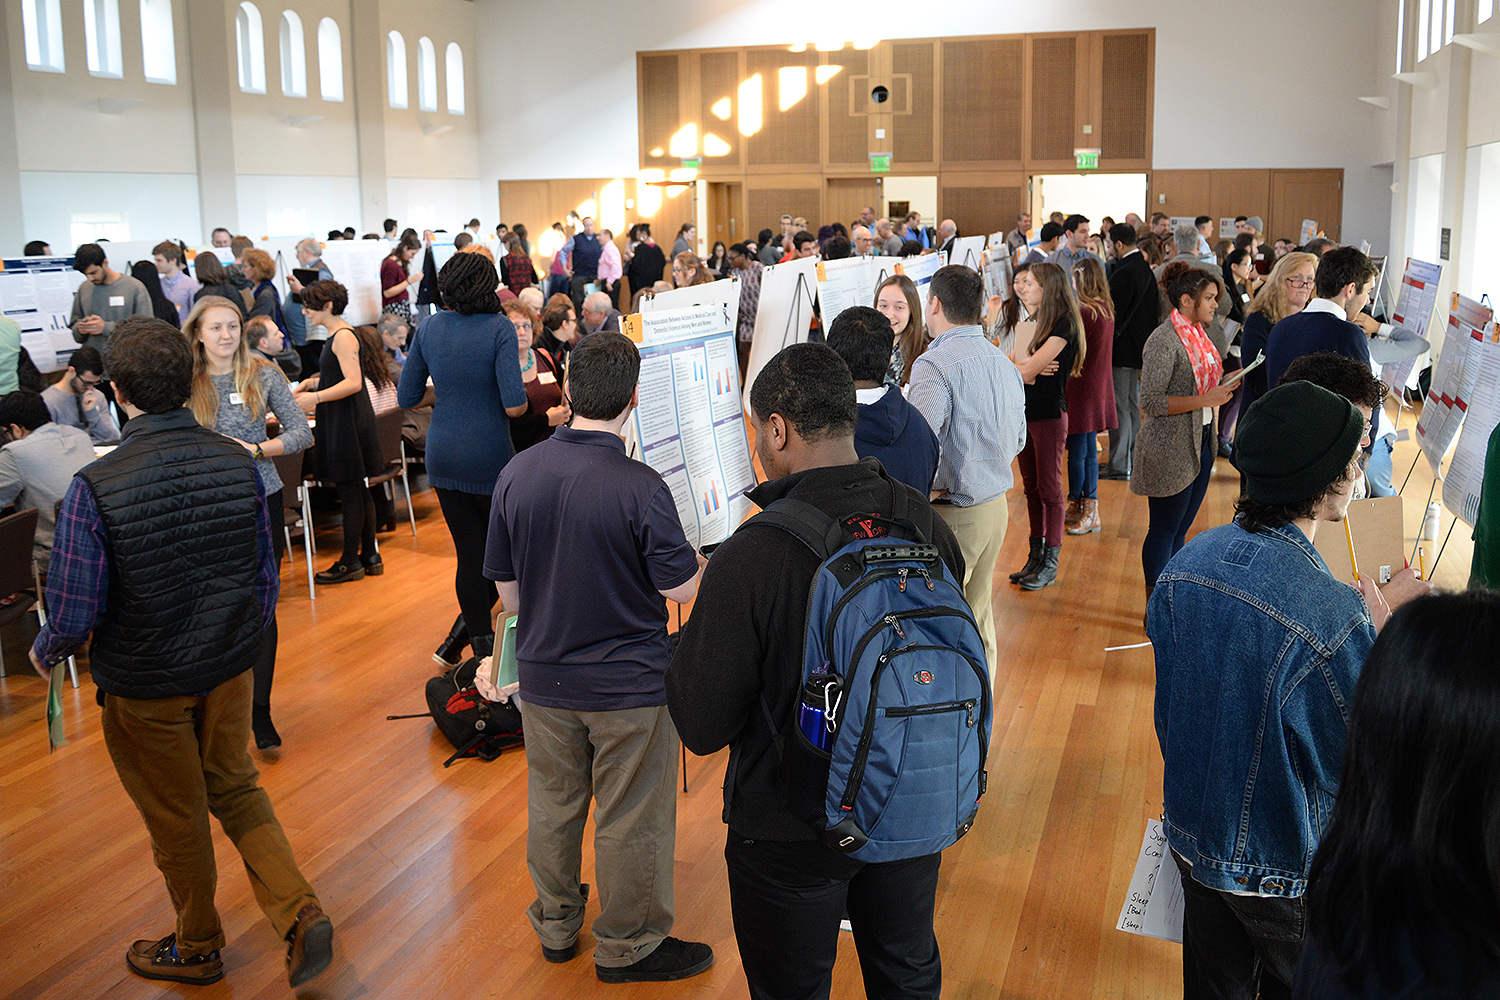 More than 100 students presented their research at the poster session. 